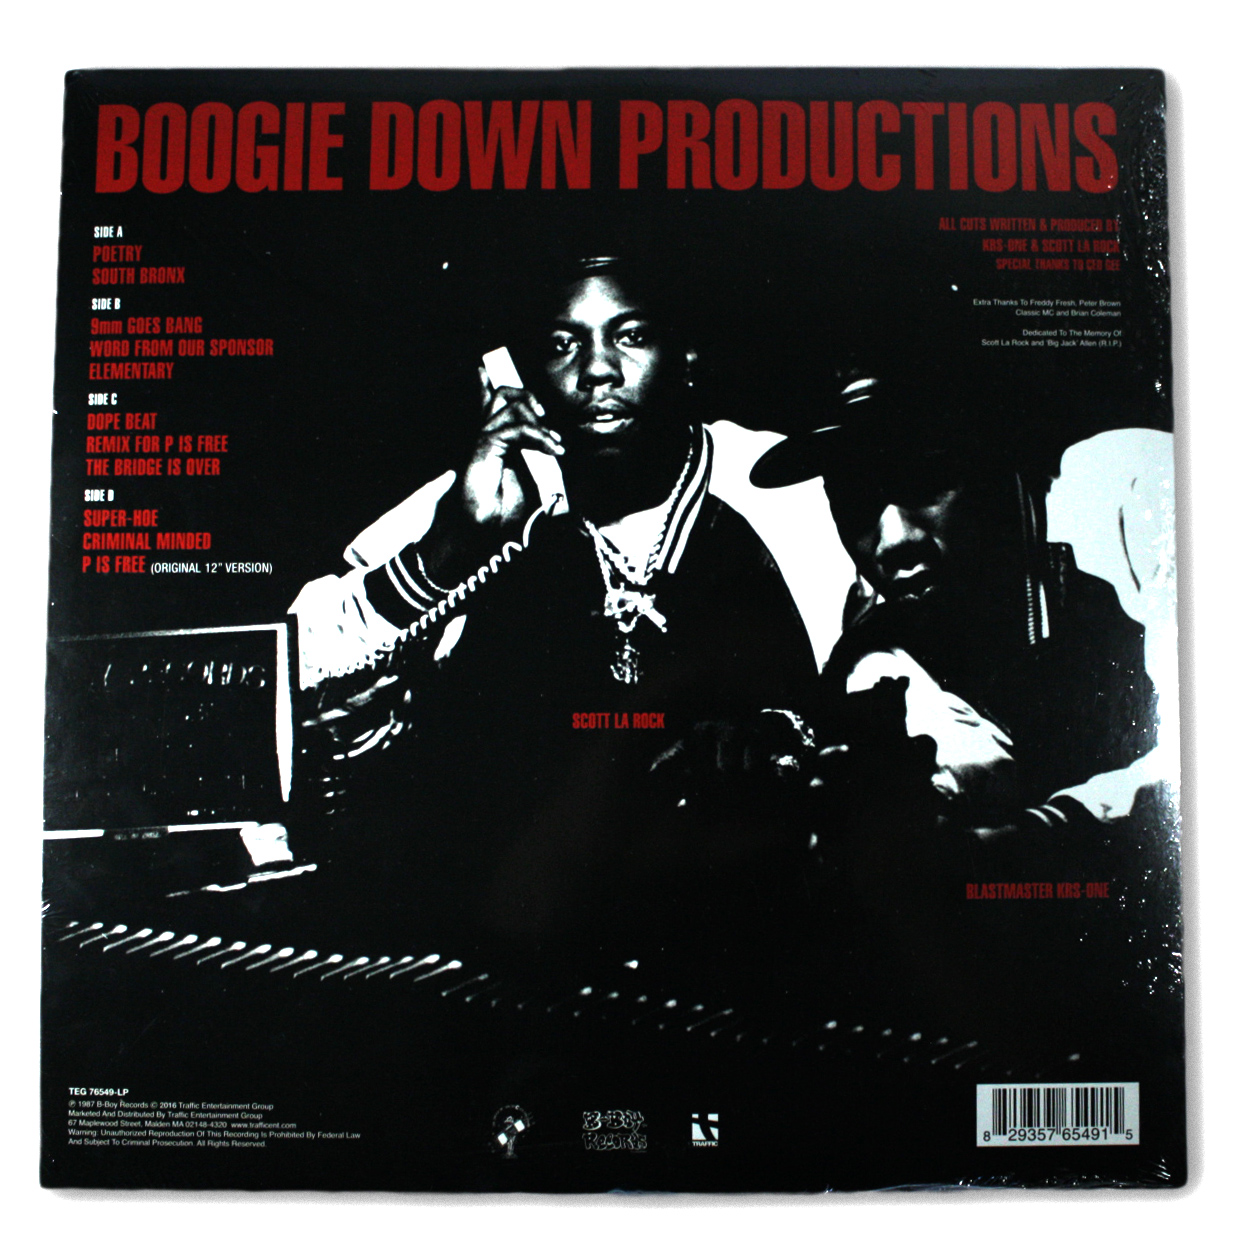 Boogie Down Productions – Criminal Minded – The ill collective.